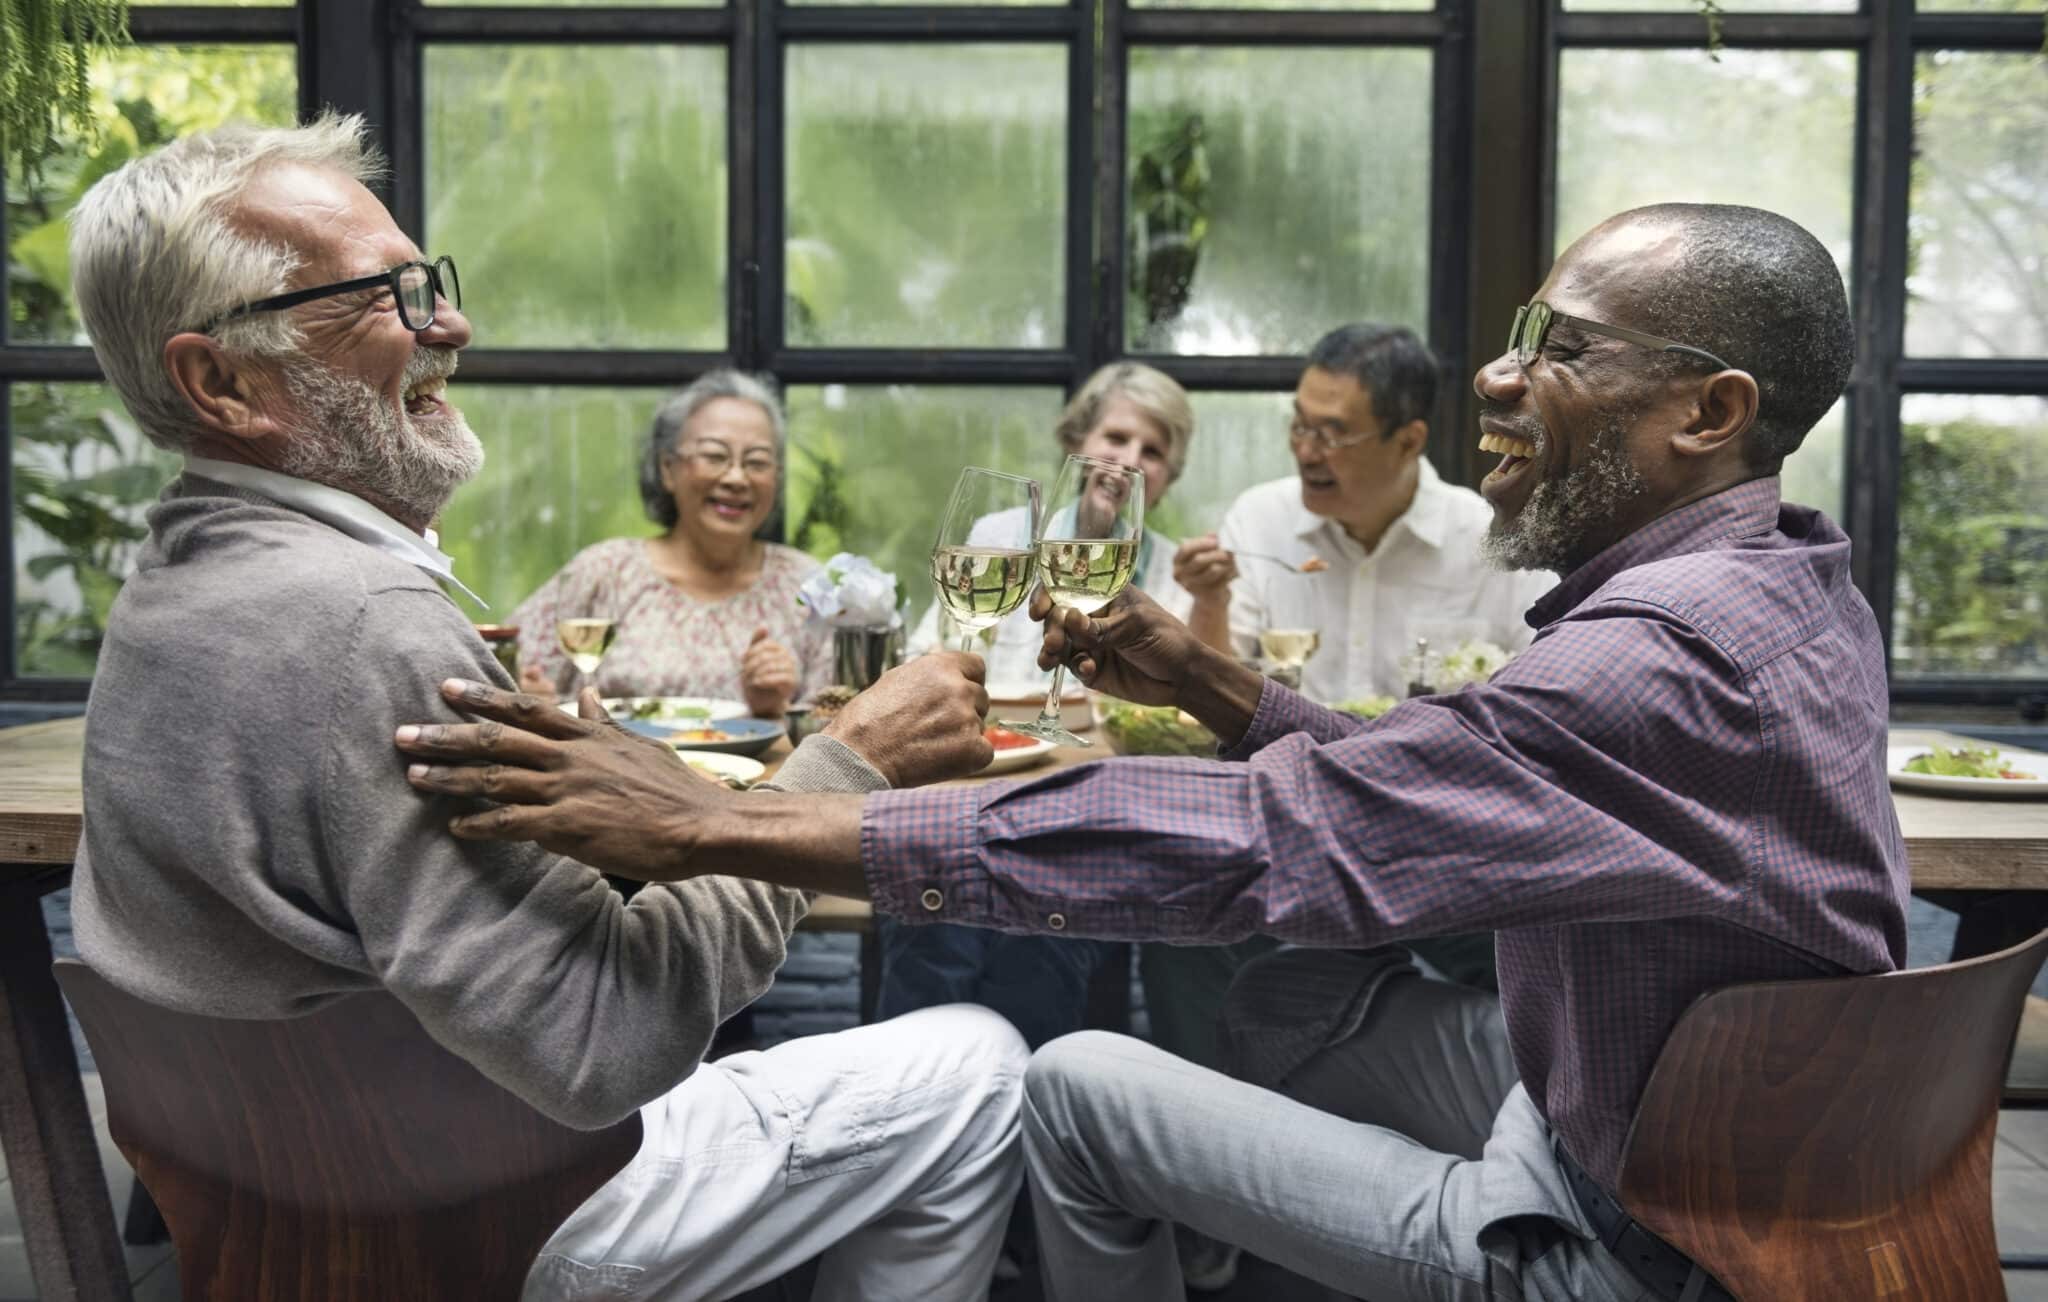 Group of older friends conversing at a dinner party.